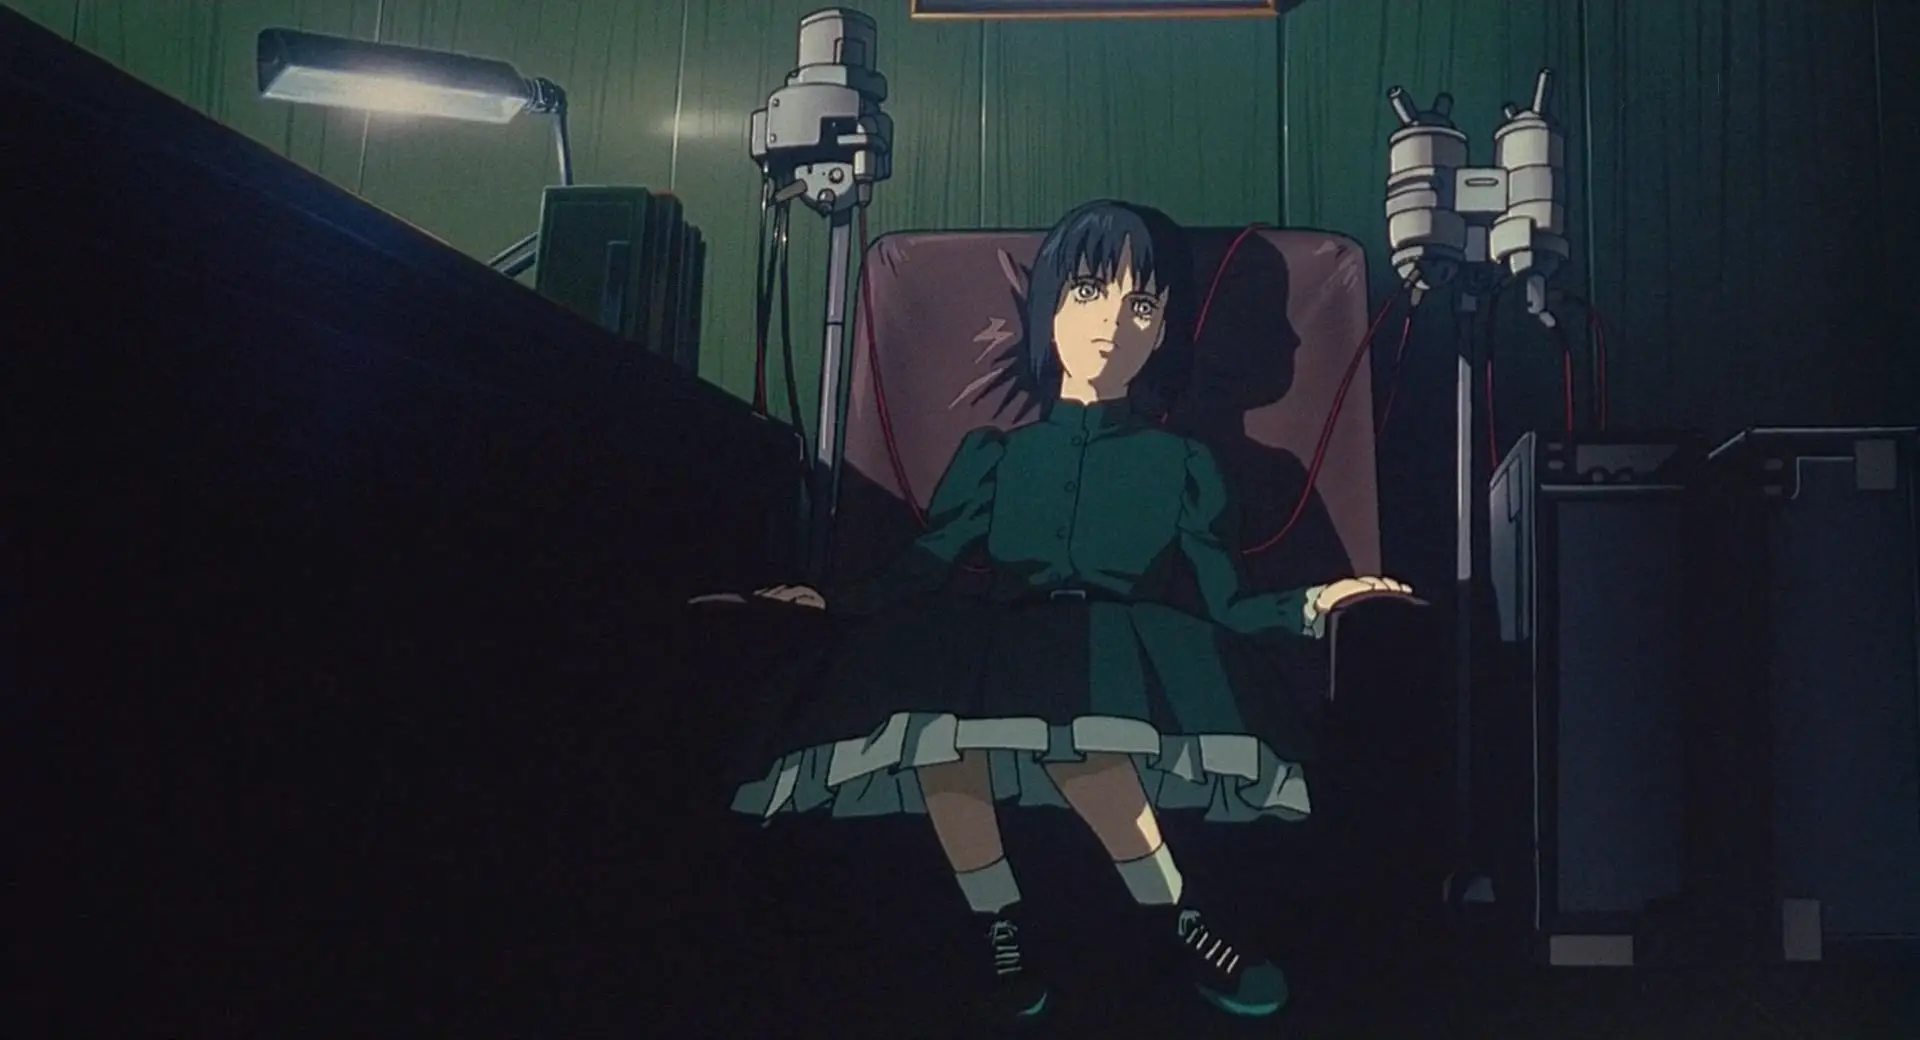 A still from GitS. The gestalt of the Major and the Puppet Master now inhabits a doll-like body wearing a green dress, sitting in a chair connected to various drip-like devices.